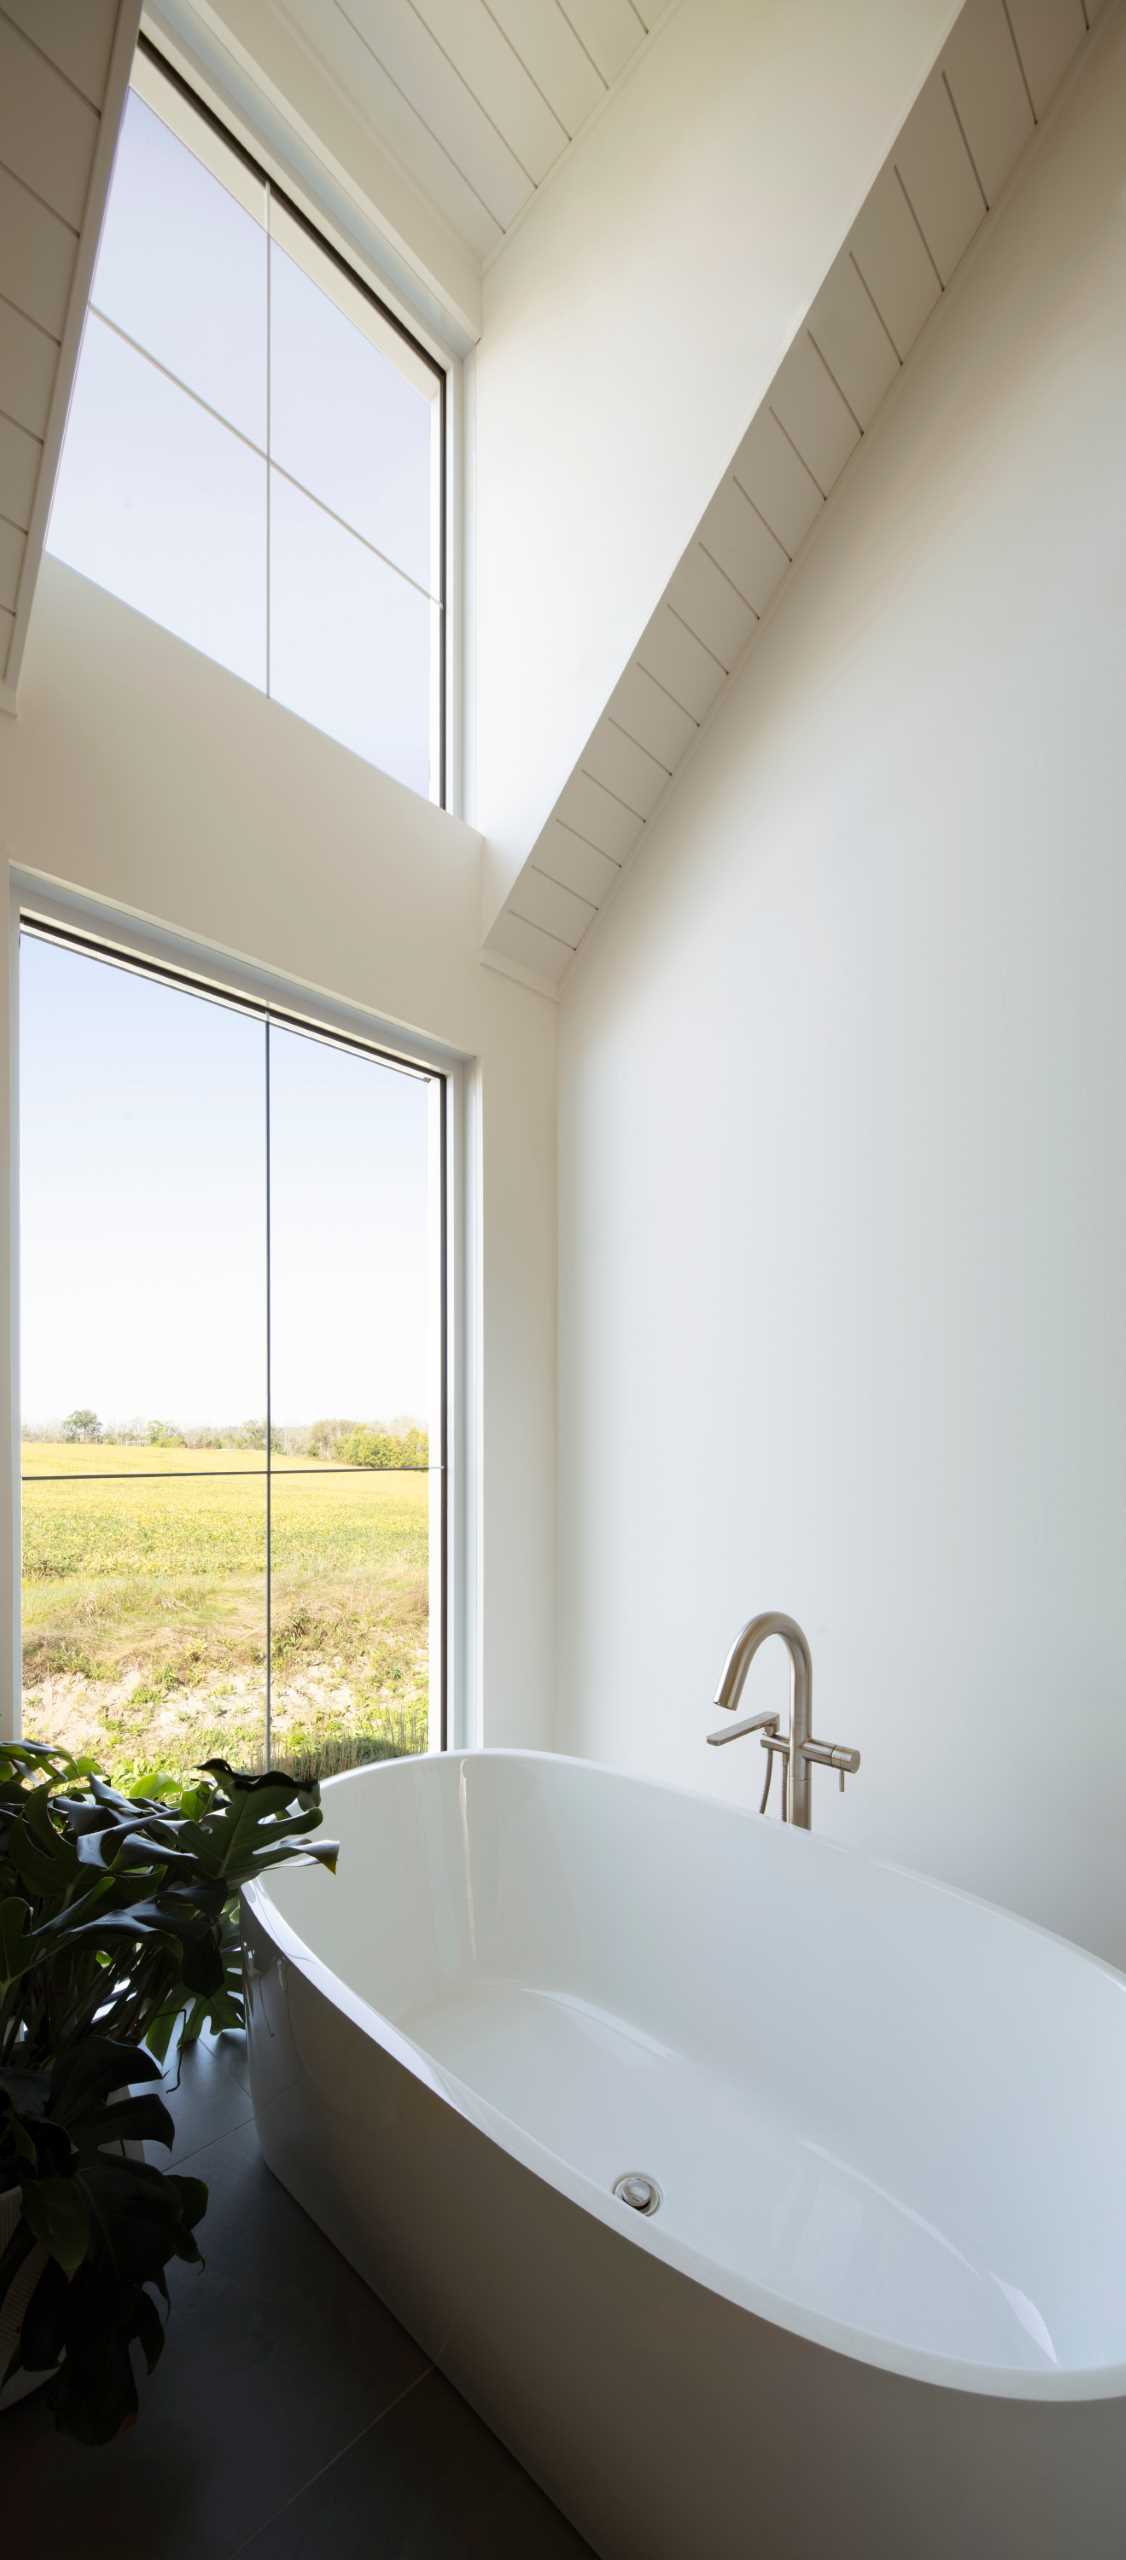 A contemporary bathroom with a freestanding bathtub by the window.